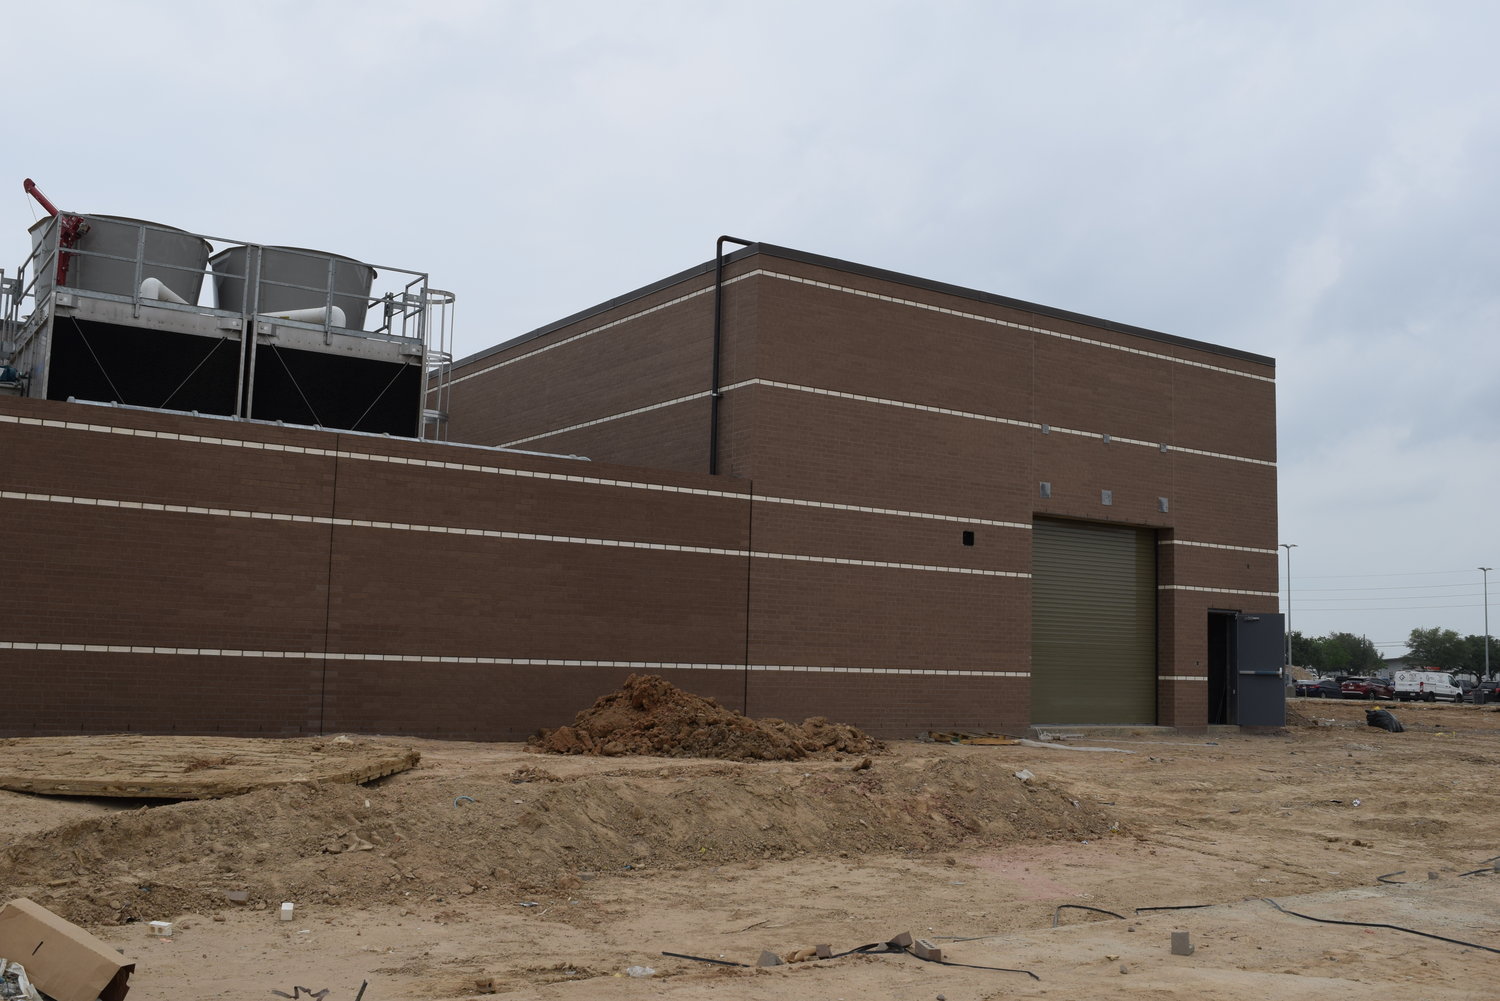 A garage door on the eastern side of the main building at Haskett Junior High provides ease of access to maintain HVAC equipment for the campus.